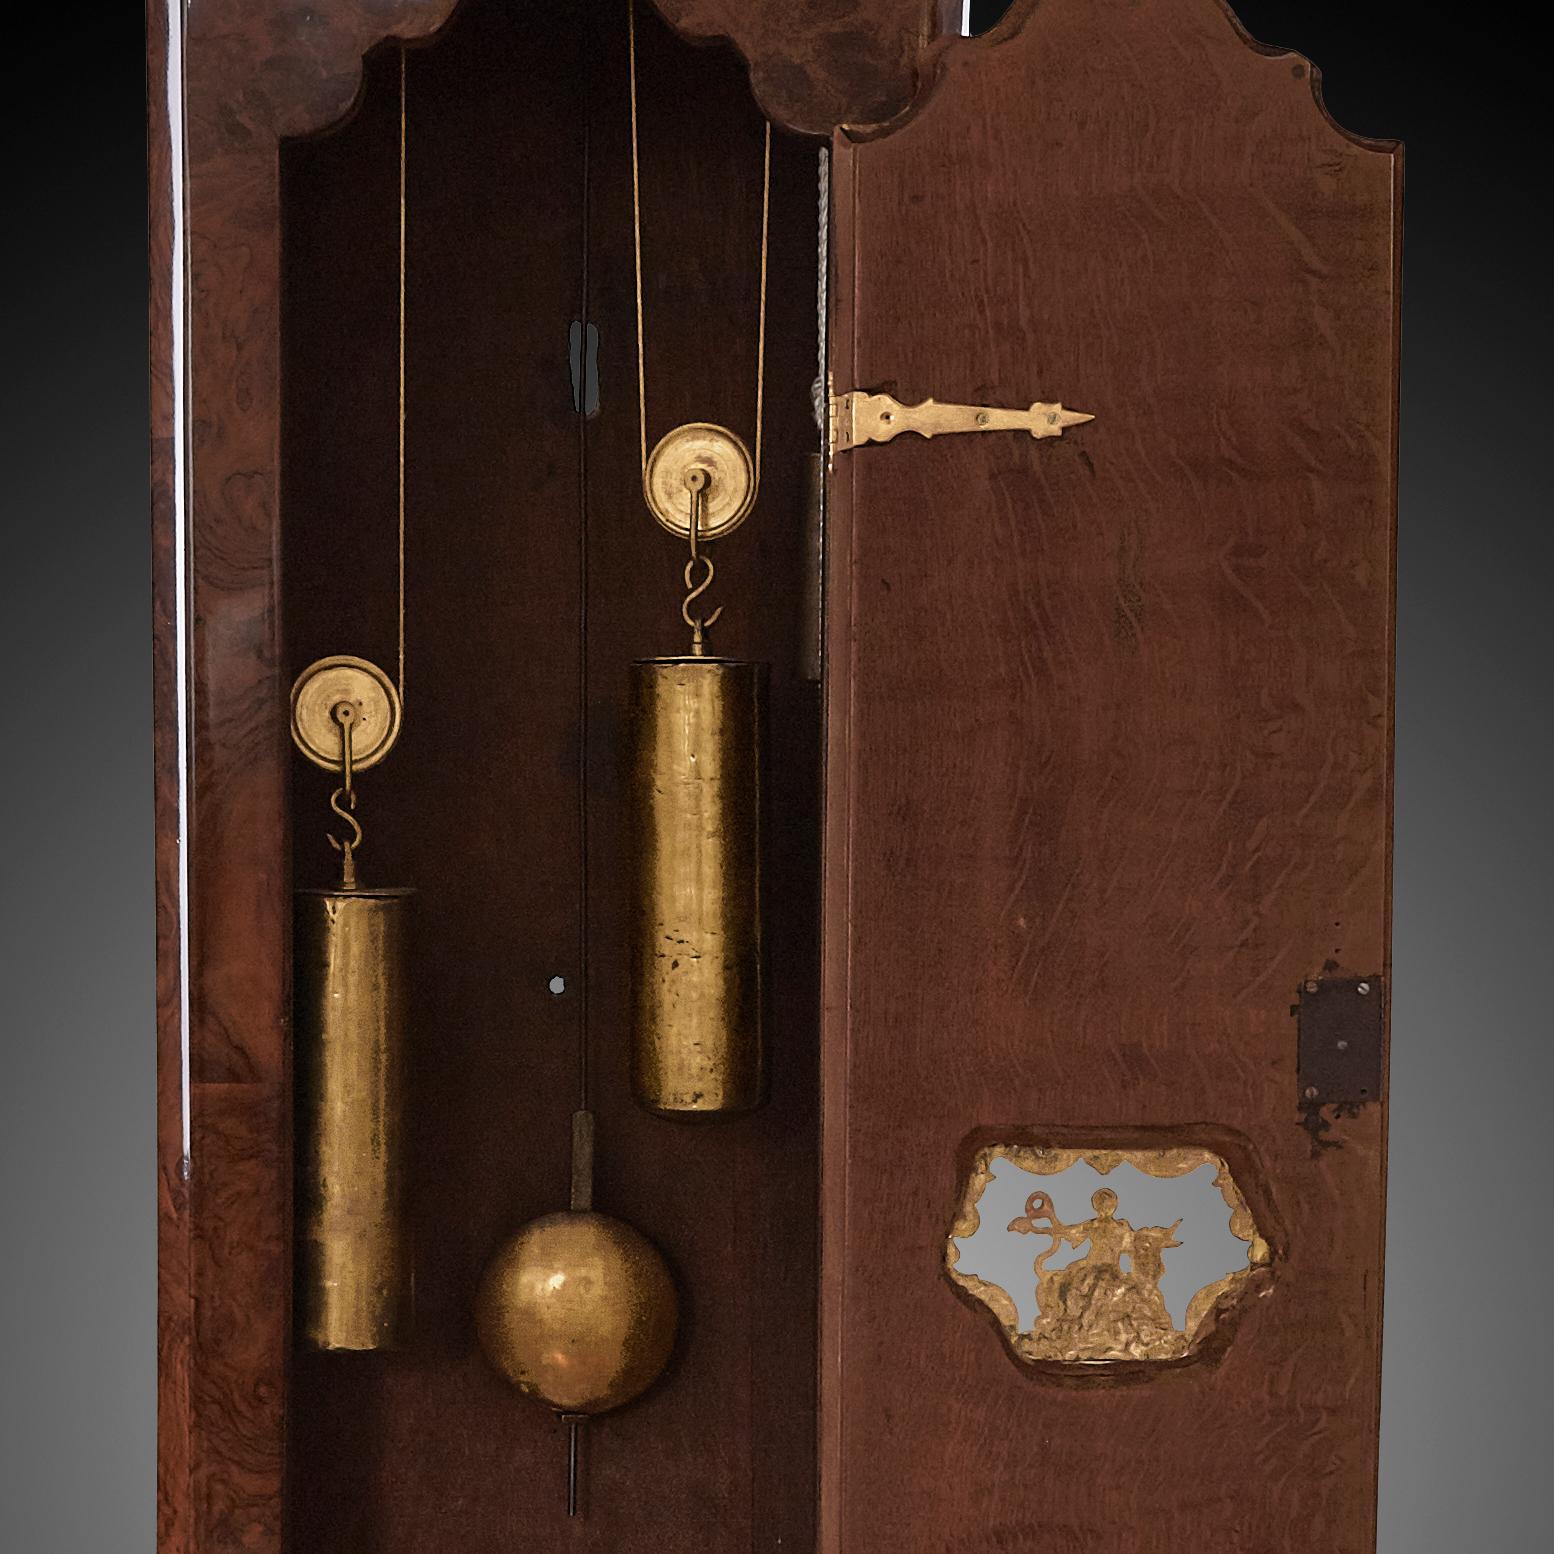 Other Magnificent 18th Century Striking Dutch Amsterdam Longcase Clock For Sale